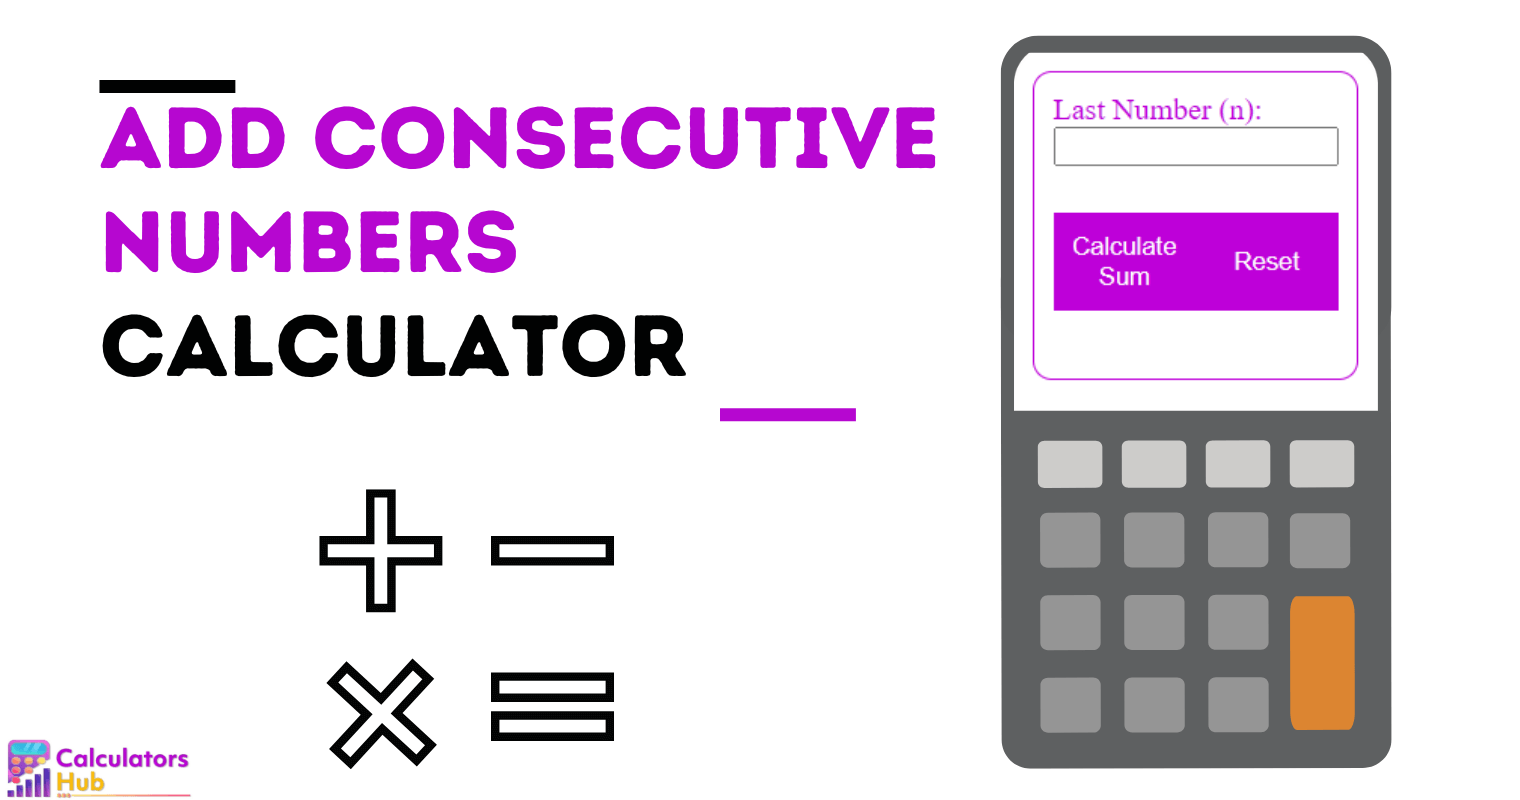 Add Consecutive Numbers Calculator